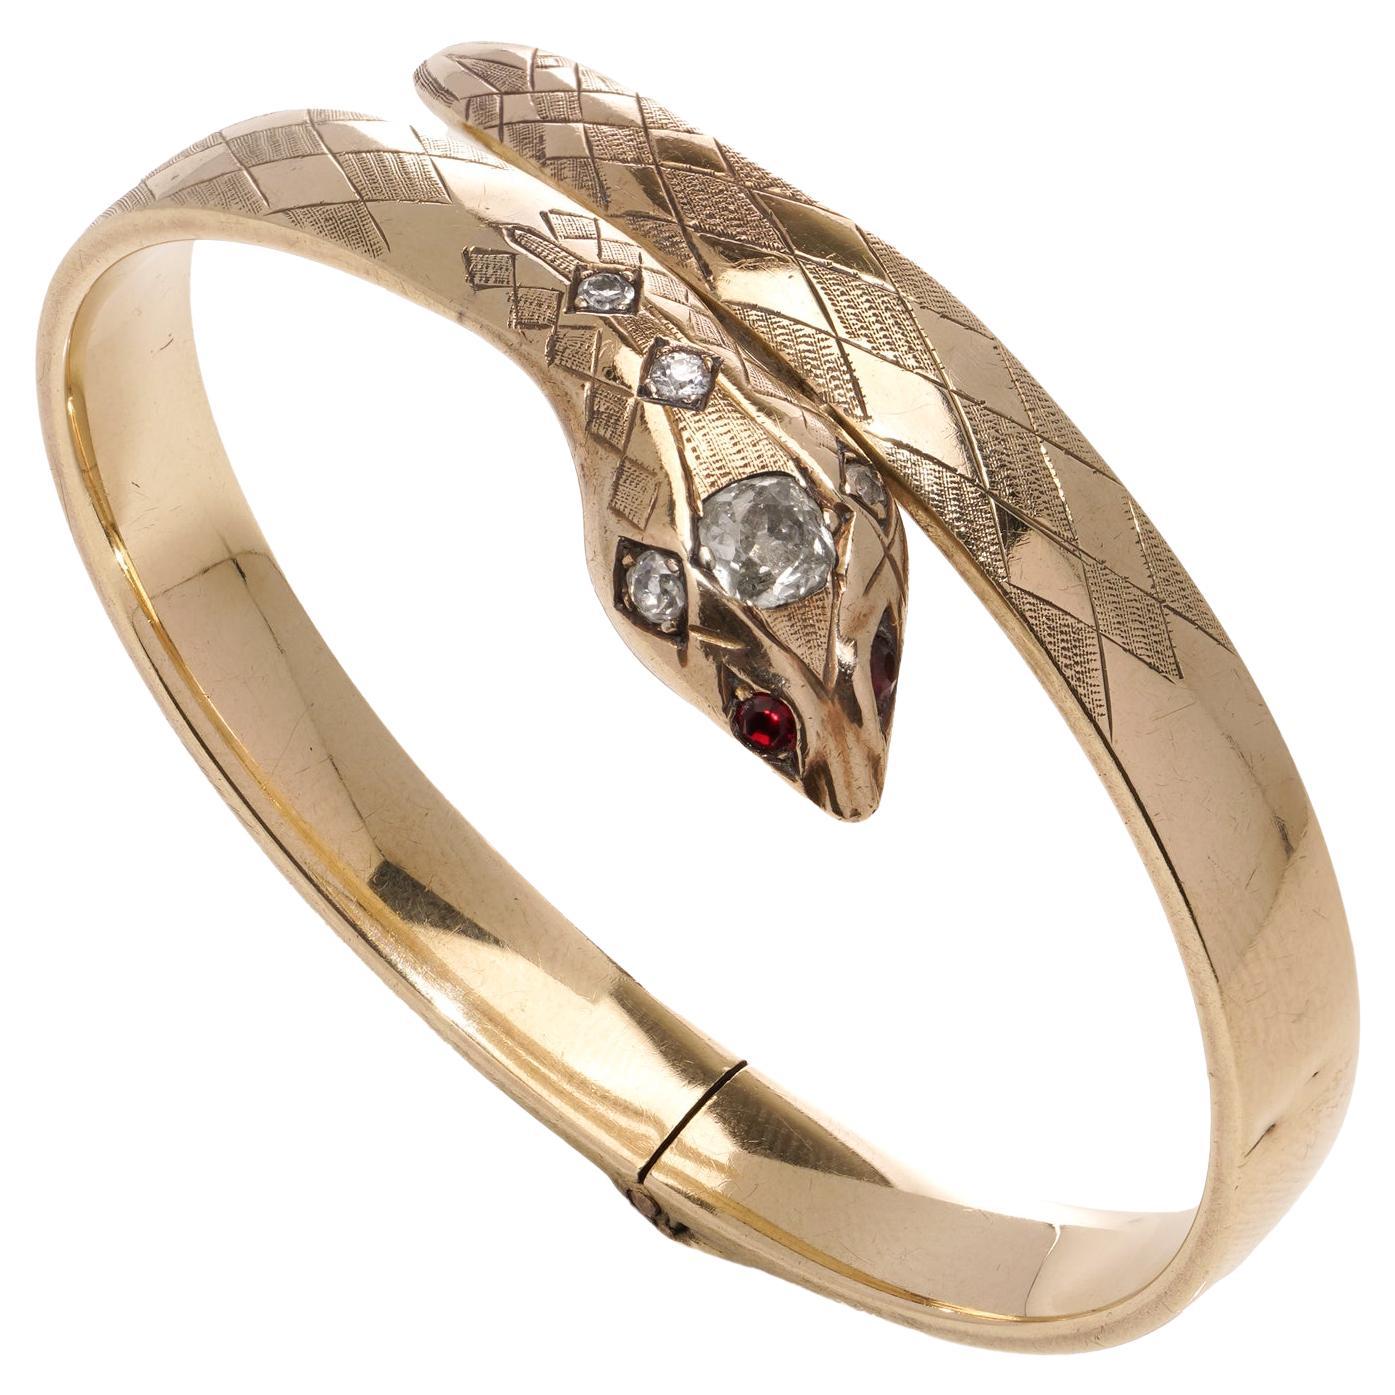 Vintage 9kt gold serpent bangle with diamonds and rubies 